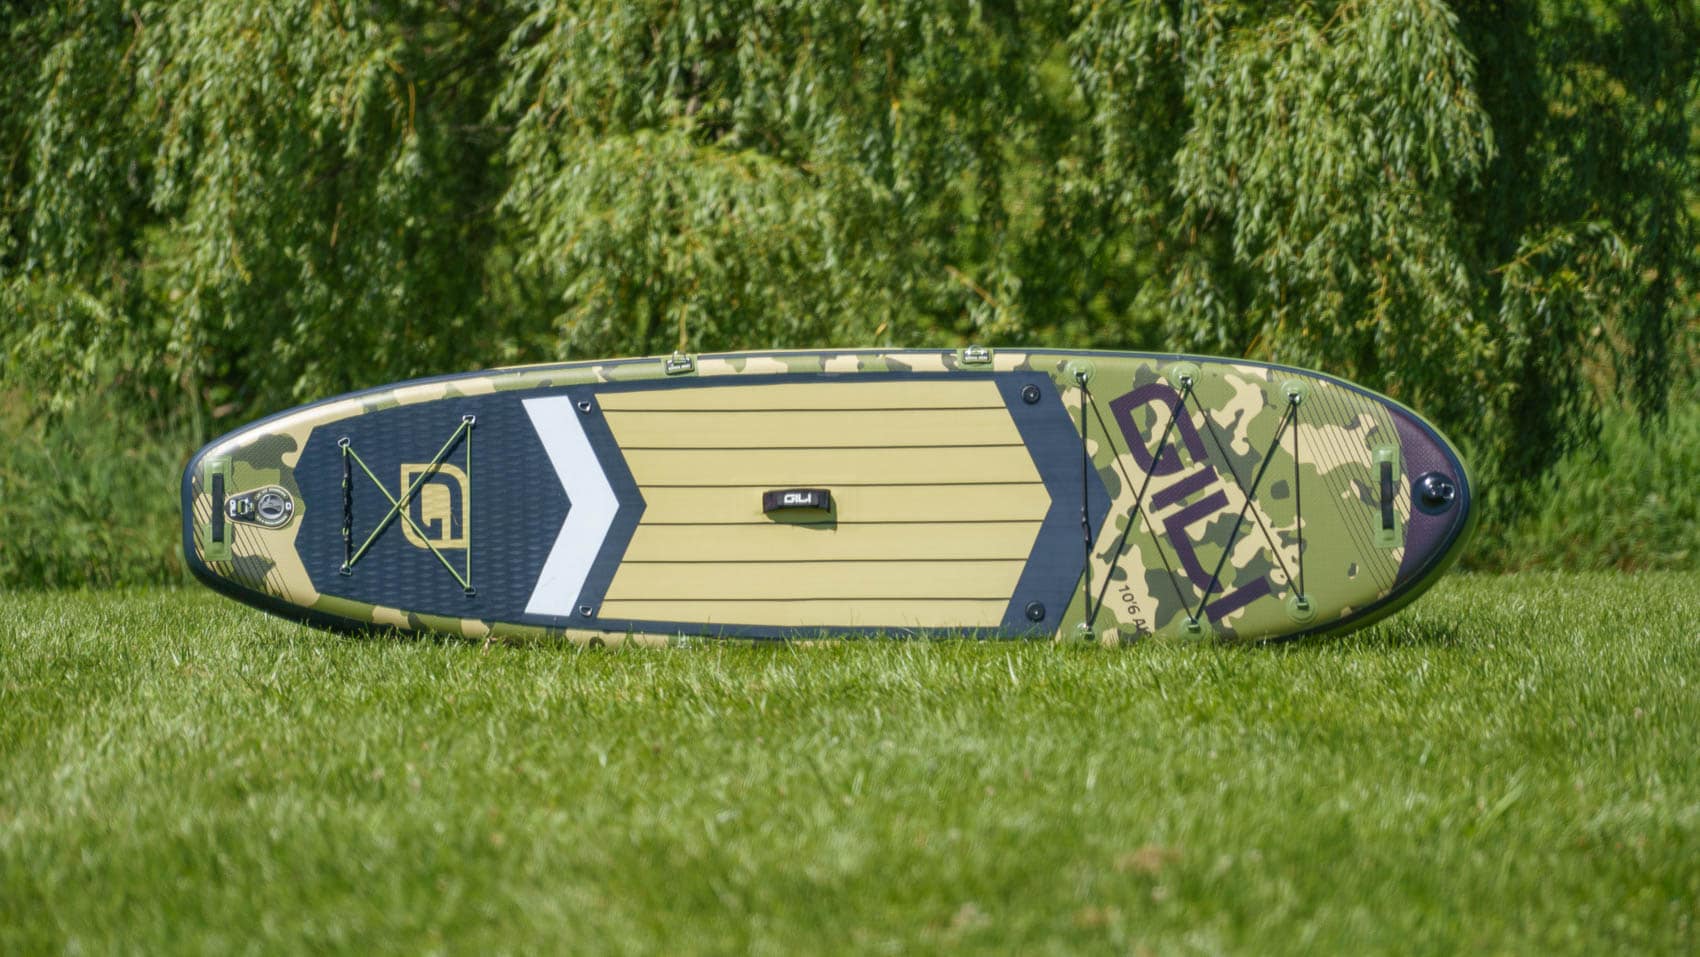 Top of the camo green GILI 10'6 air, featuring 3 handles, 2 bungie cargo areas, 3 action mounts, and 7 extra d-rings.